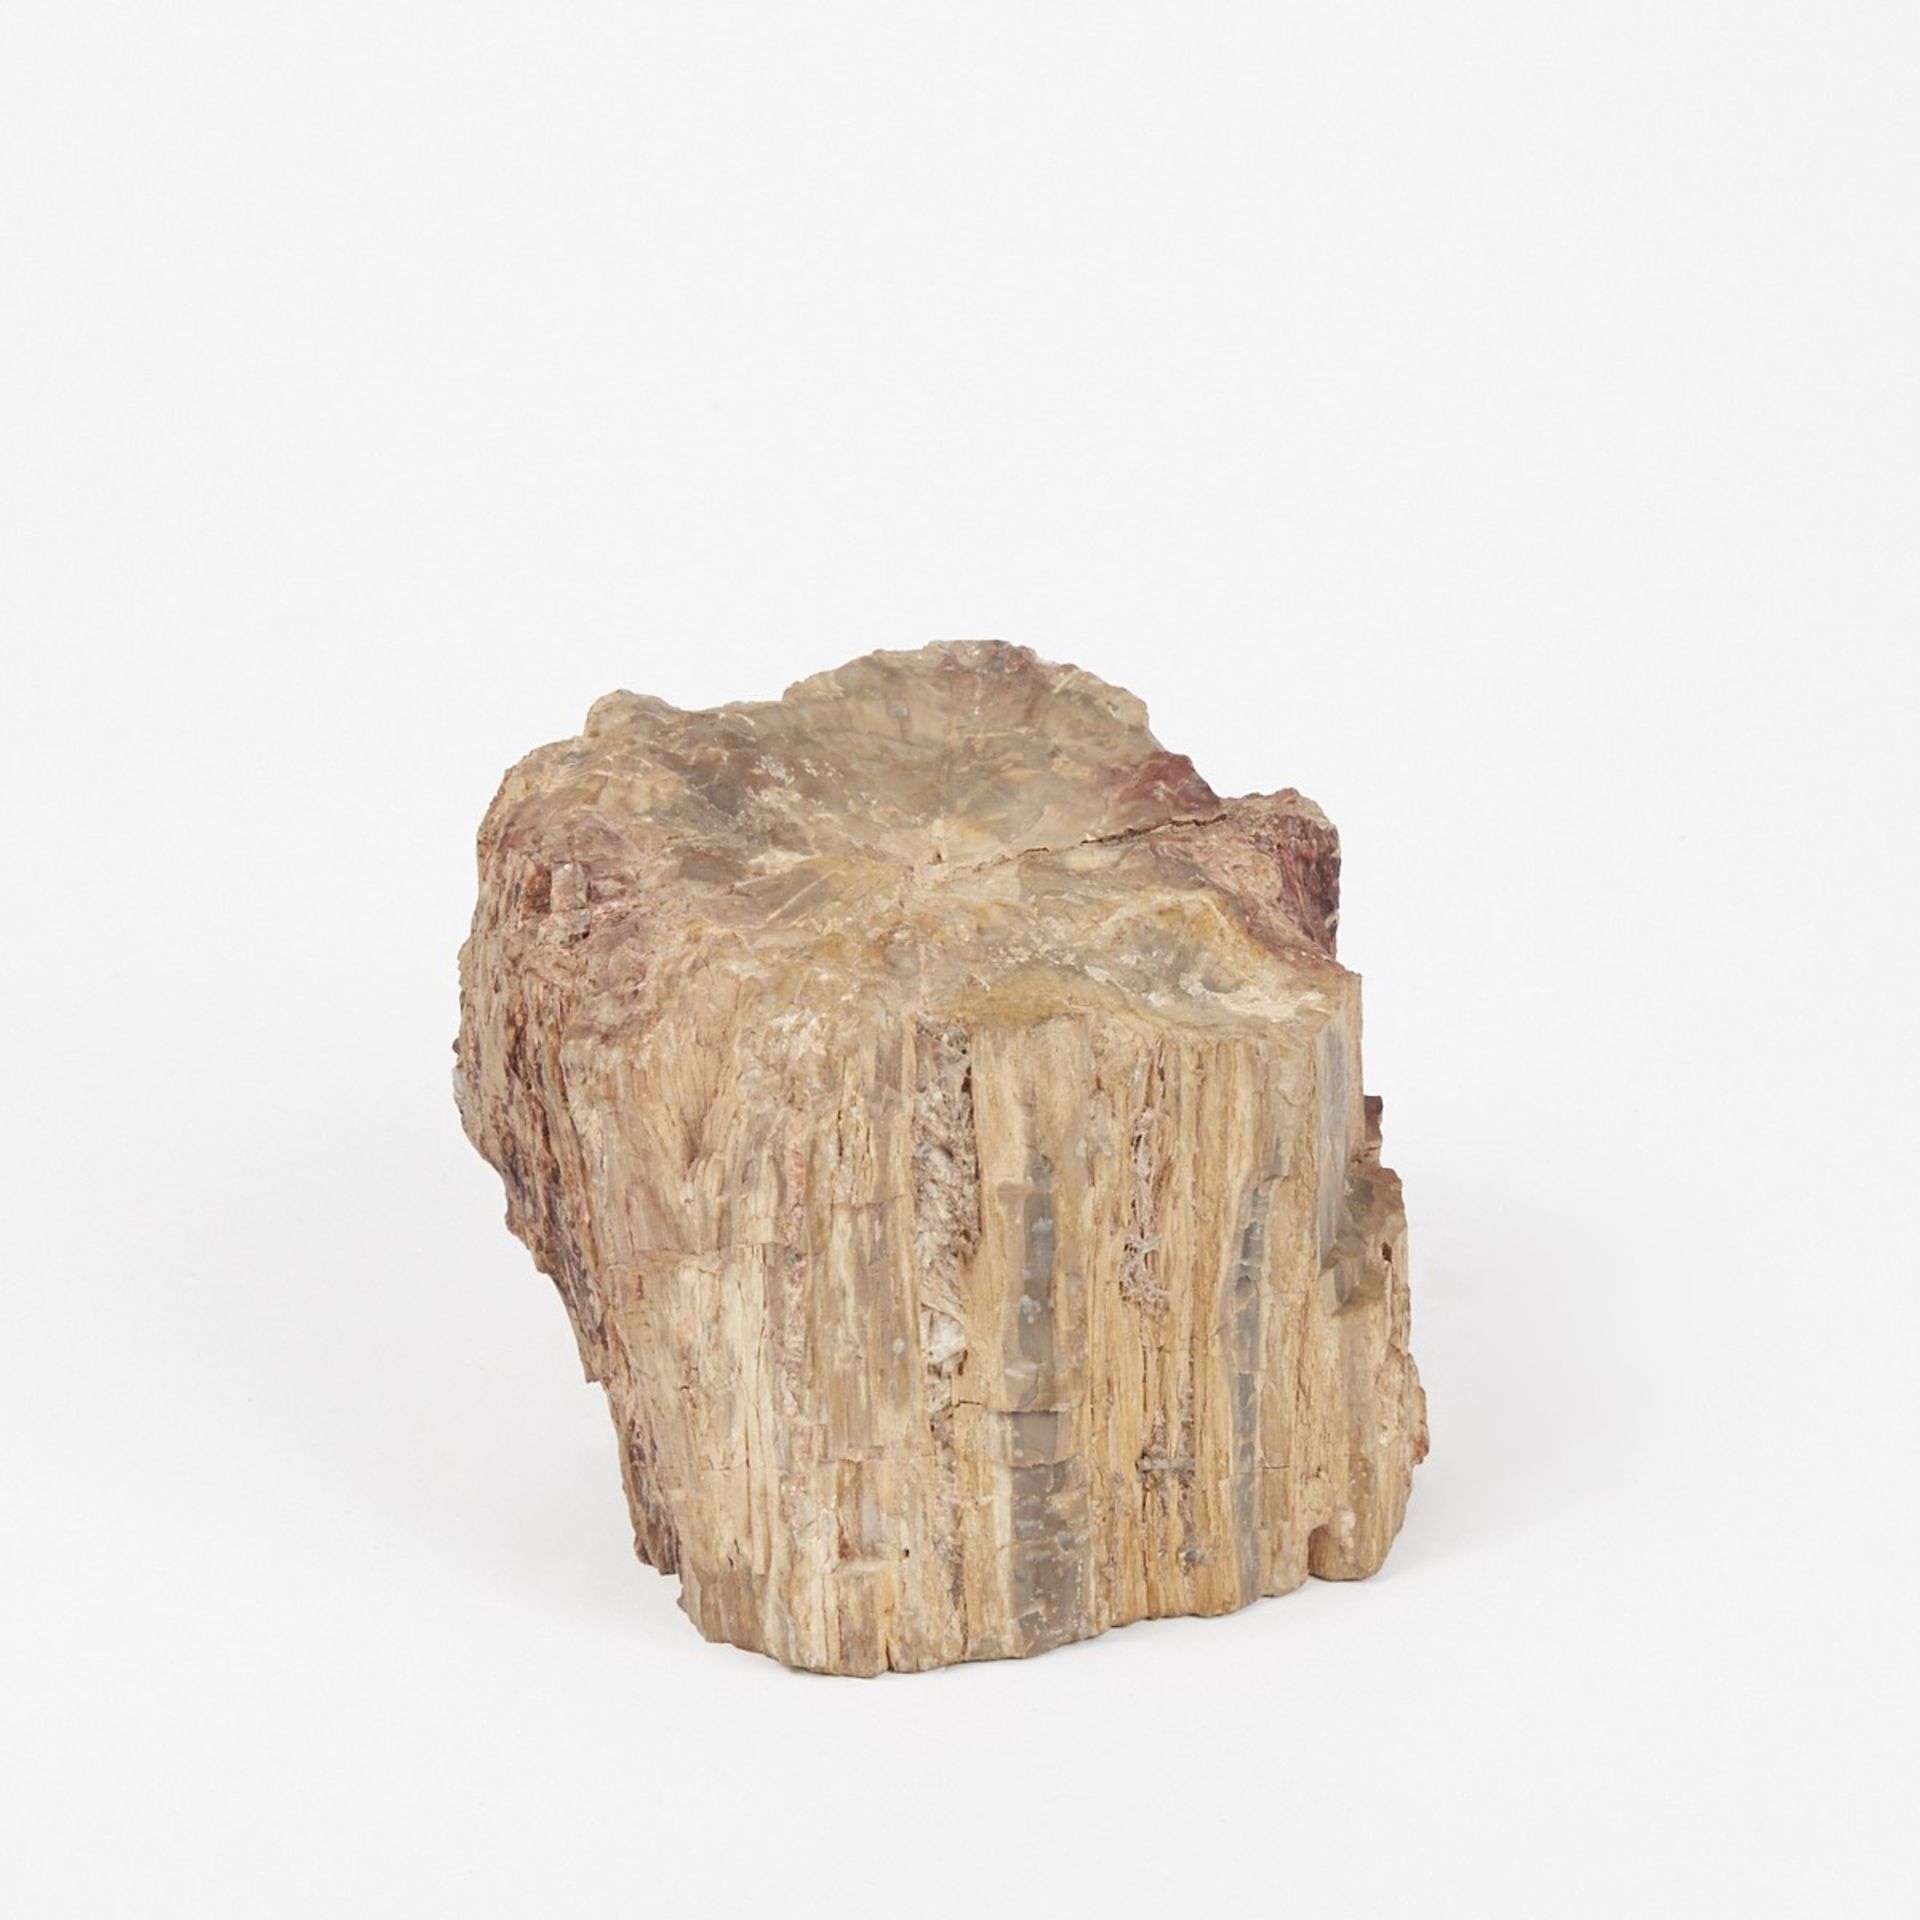 Large Petrified Wood Stump or Branch - Image 2 of 7